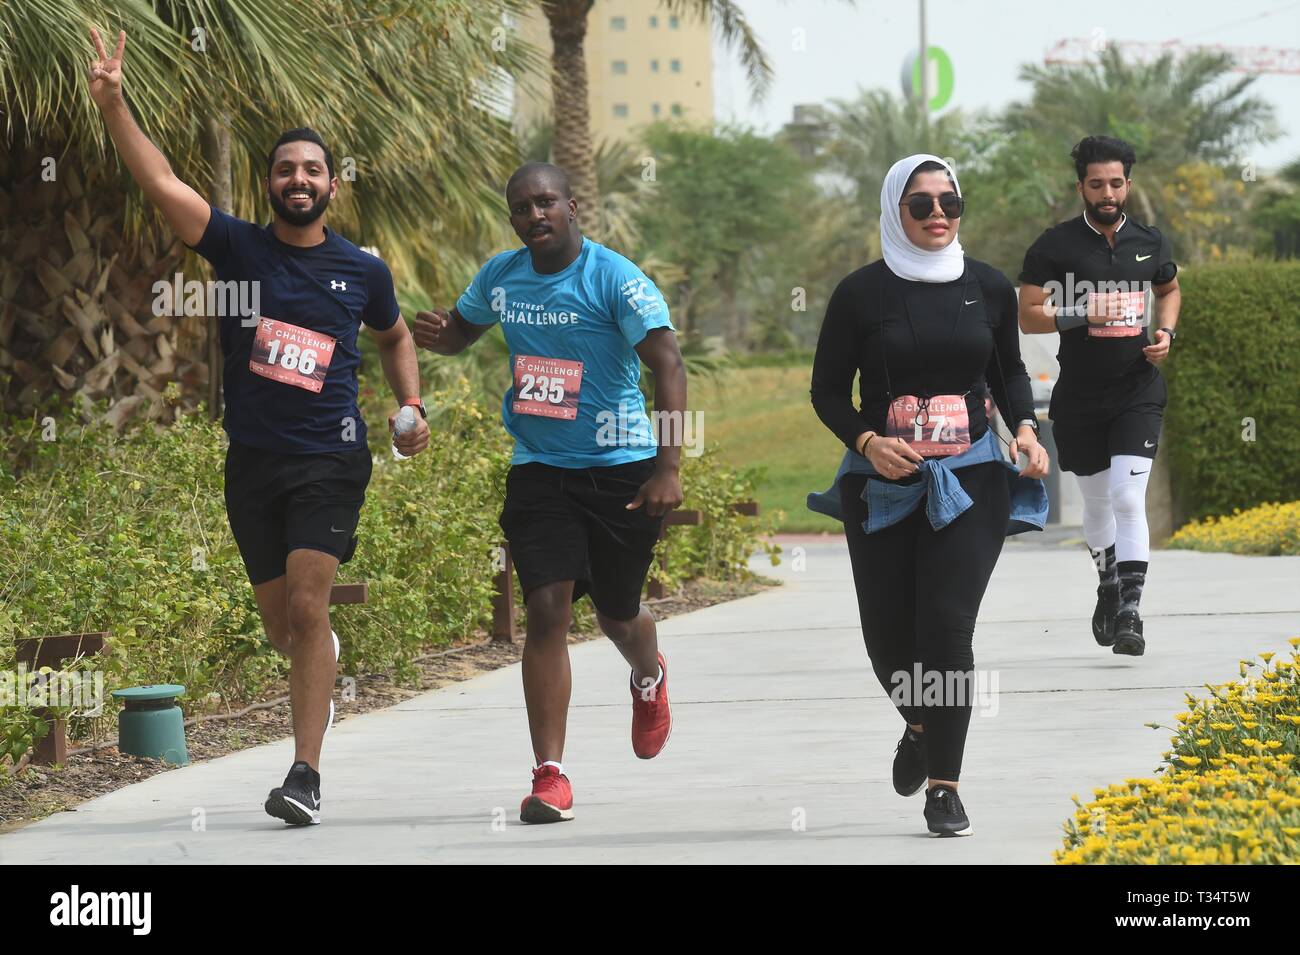 Kuwait City, Kuwait. 6th Apr, 2019. People run during a fitness challenge day event at Al Shaheed Park, one of the largest urban parks in Kuwait City, Kuwait, on April 6, 2019. Credit: Asad/Xinhua/Alamy Live News Stock Photo